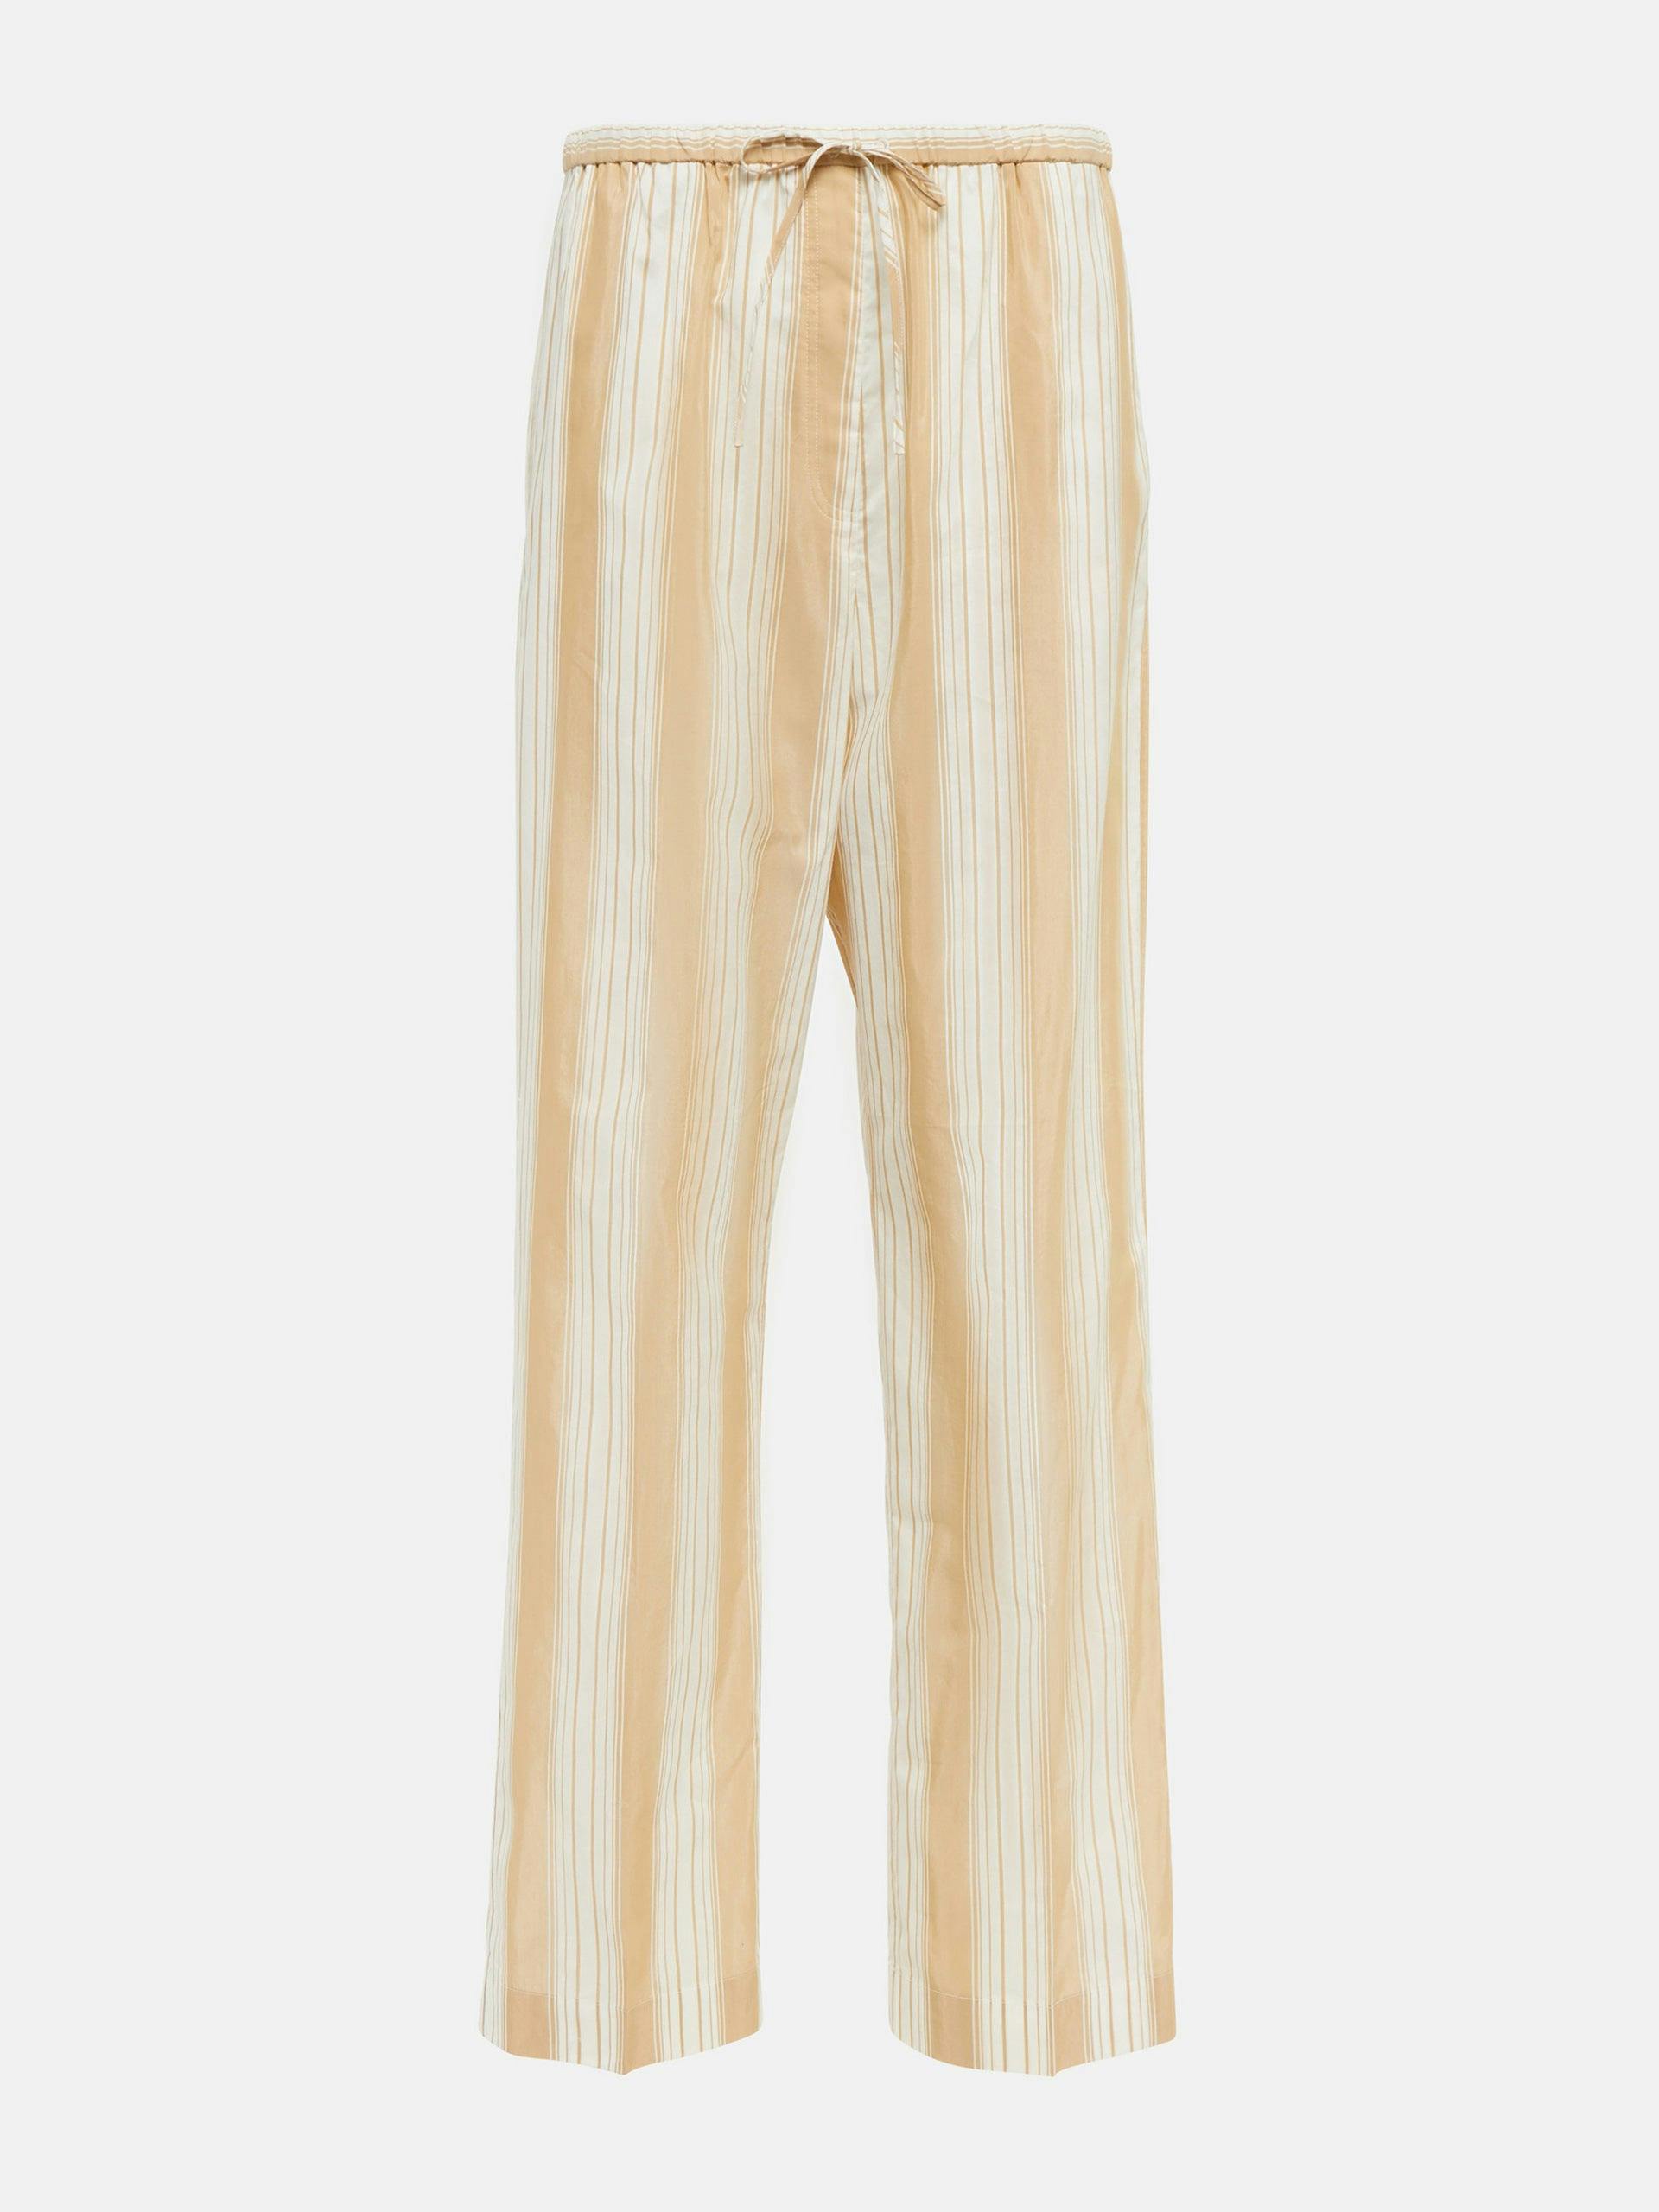 Stripe cotton and silk trousers with drawstring waist